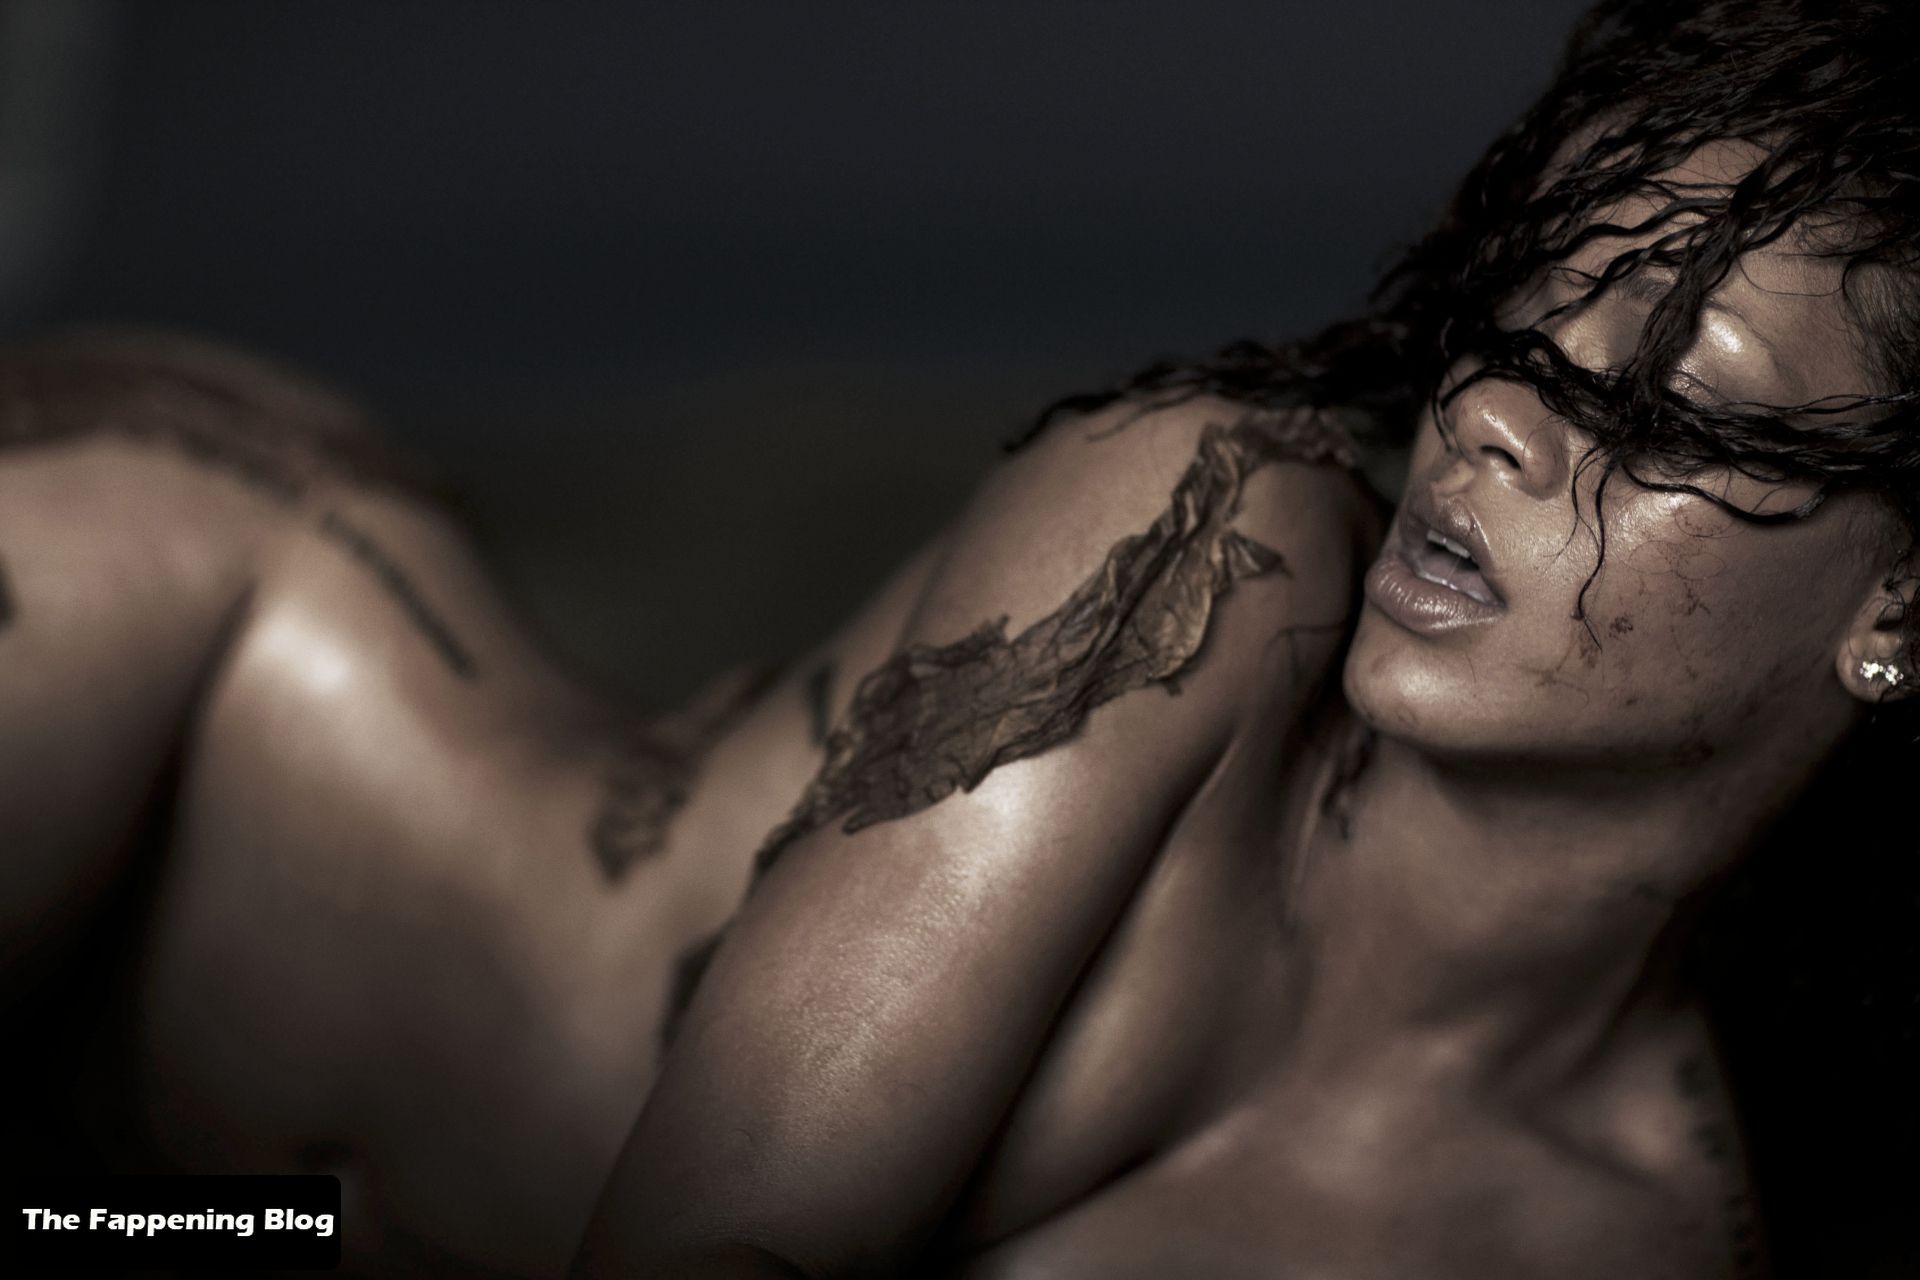 The-Fappening-Star-and-Singer-Rihanna-Shows-Off-Her-Gorgeous-Body-in-a-Sexy-Naked-Esquire-Magazine-Photoshoot-Outtakes-November-2011-25-thefappeningblog.com_.jpg